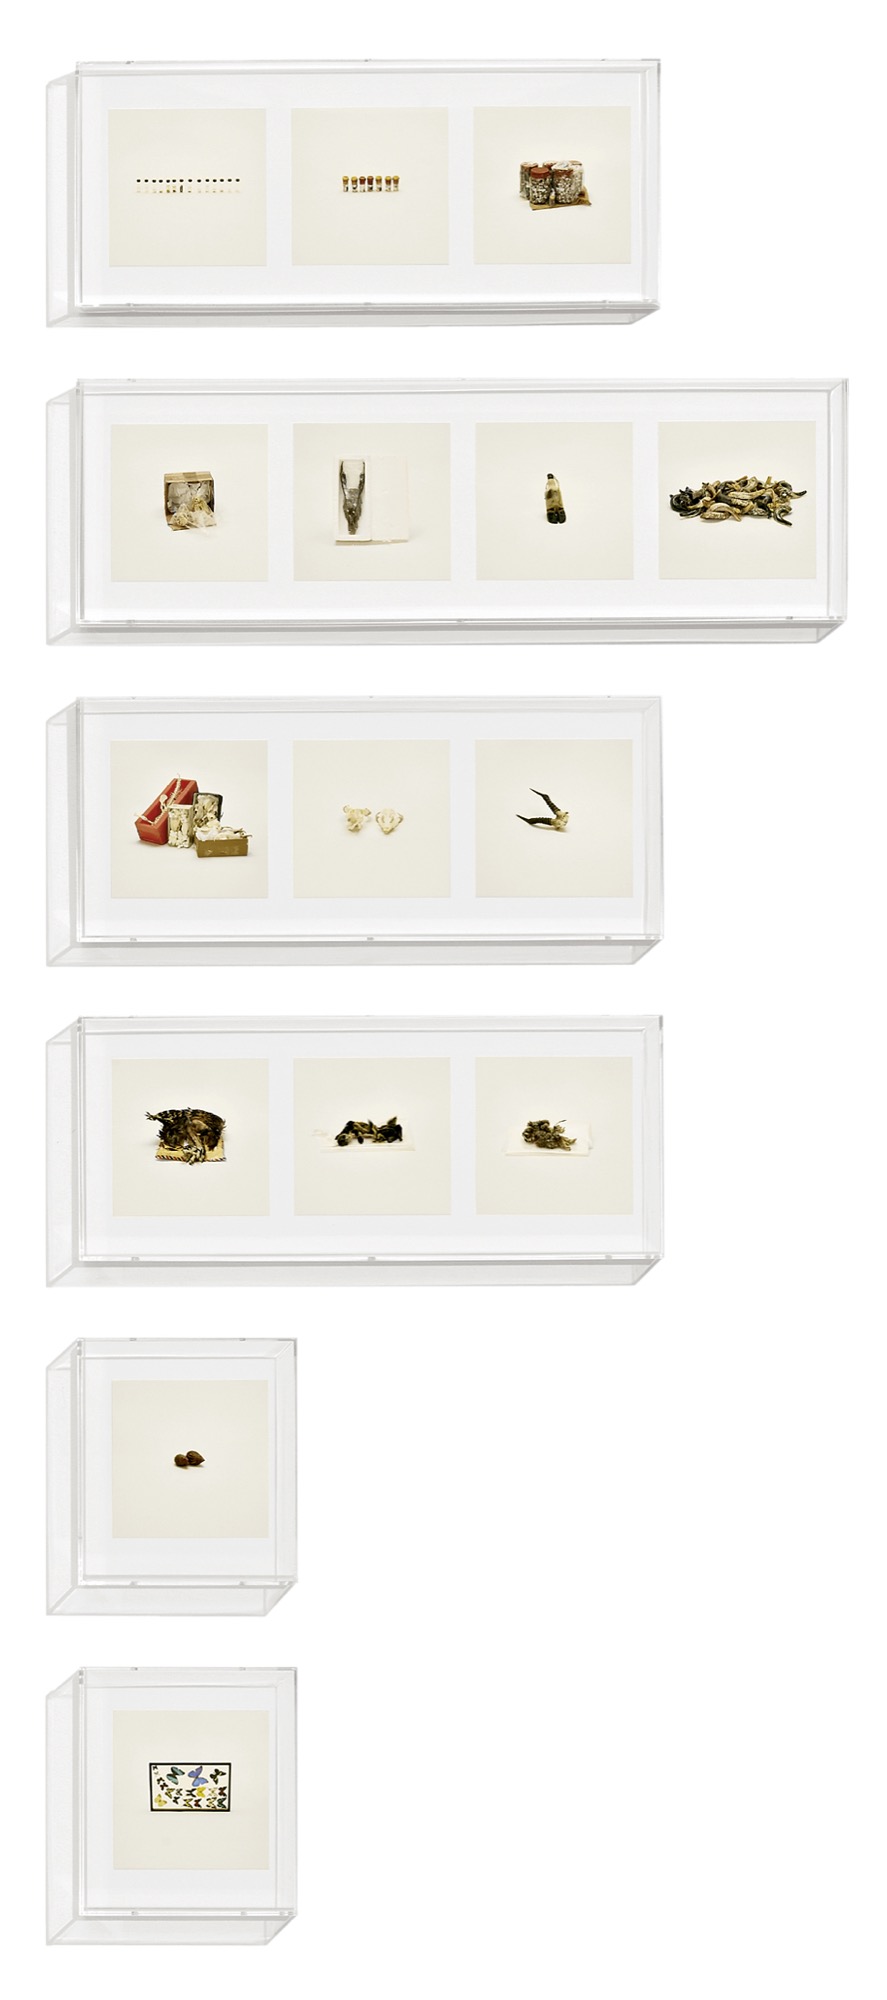 Animal Corpses (Prohibited), Animal Parts (Prohibited), Animal Skeletons (Prohibited), Animal Specimens (Prohibited), Snails (Prohibited), Butterflies (Prohibited)<em>, Contraband</em>, 2010, 15 archival inkjet prints in 6 Plexiglas boxes and Letraset on wall 23.5 x 57.8; 76.2; 21 cm © Taryn Simon. Courtesy Gagosian and Anna Schwartz Gallery.